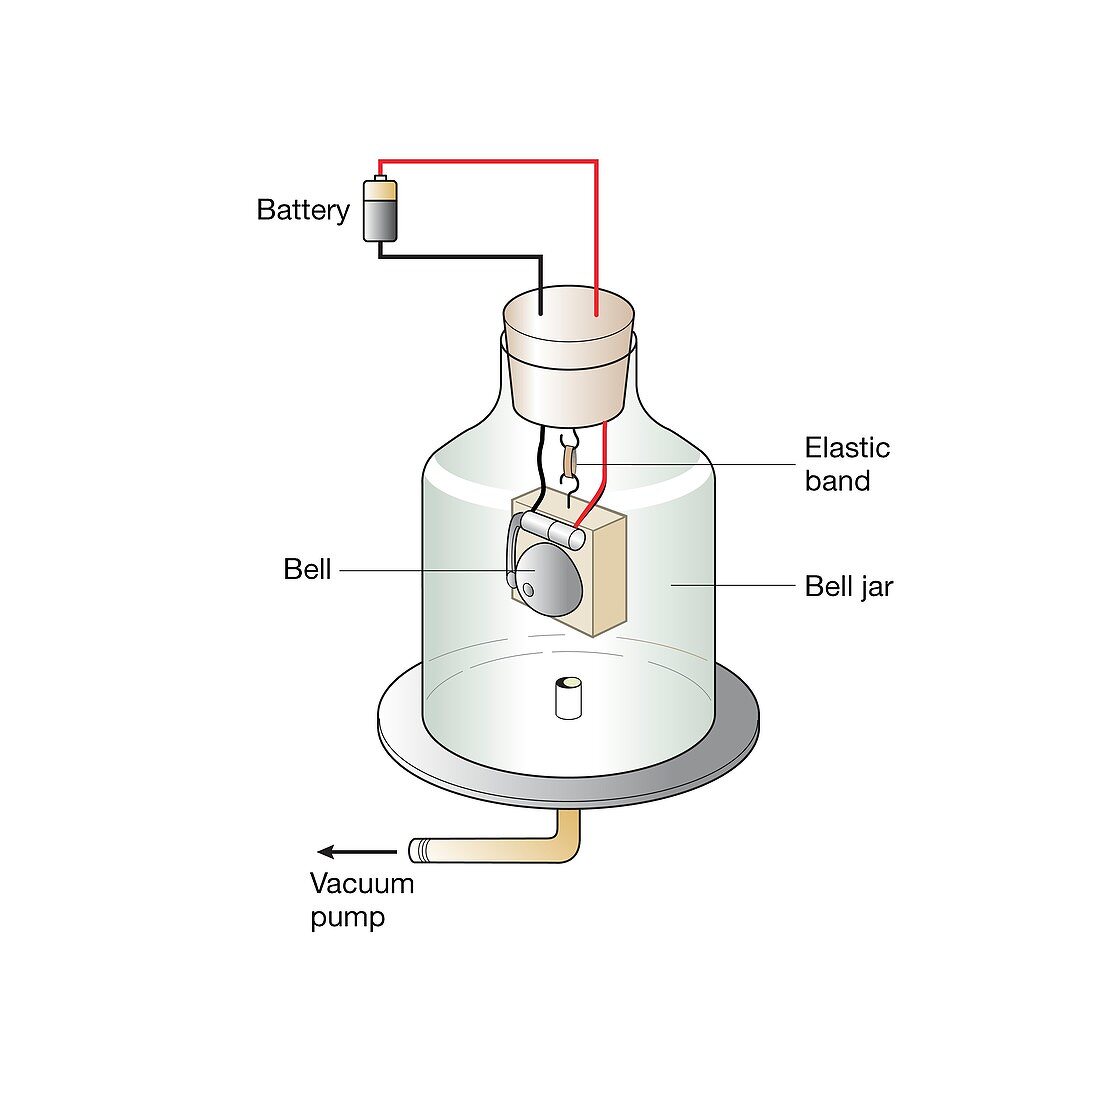 Electric bell in a vacuum, illustration